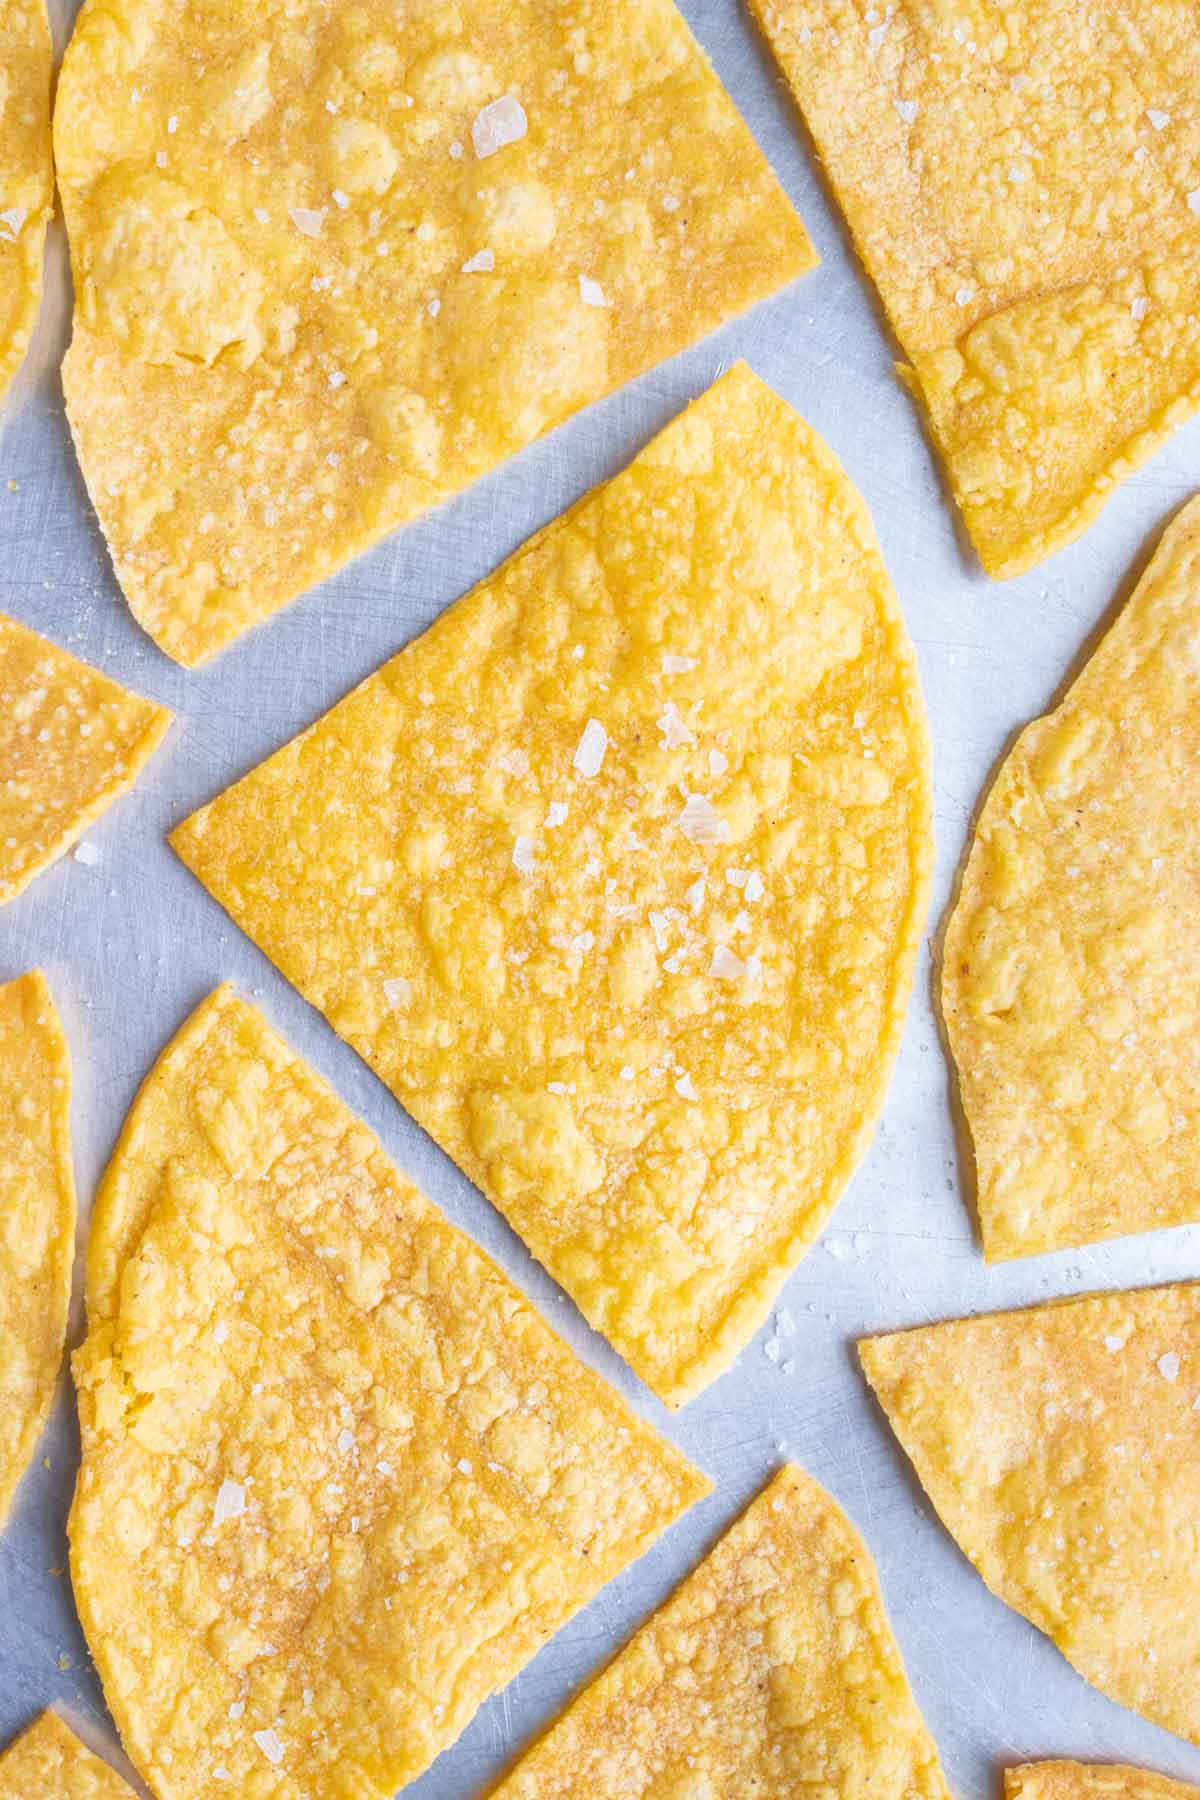 Perfectly baked and healthy chips made from yellow corn tortillas.